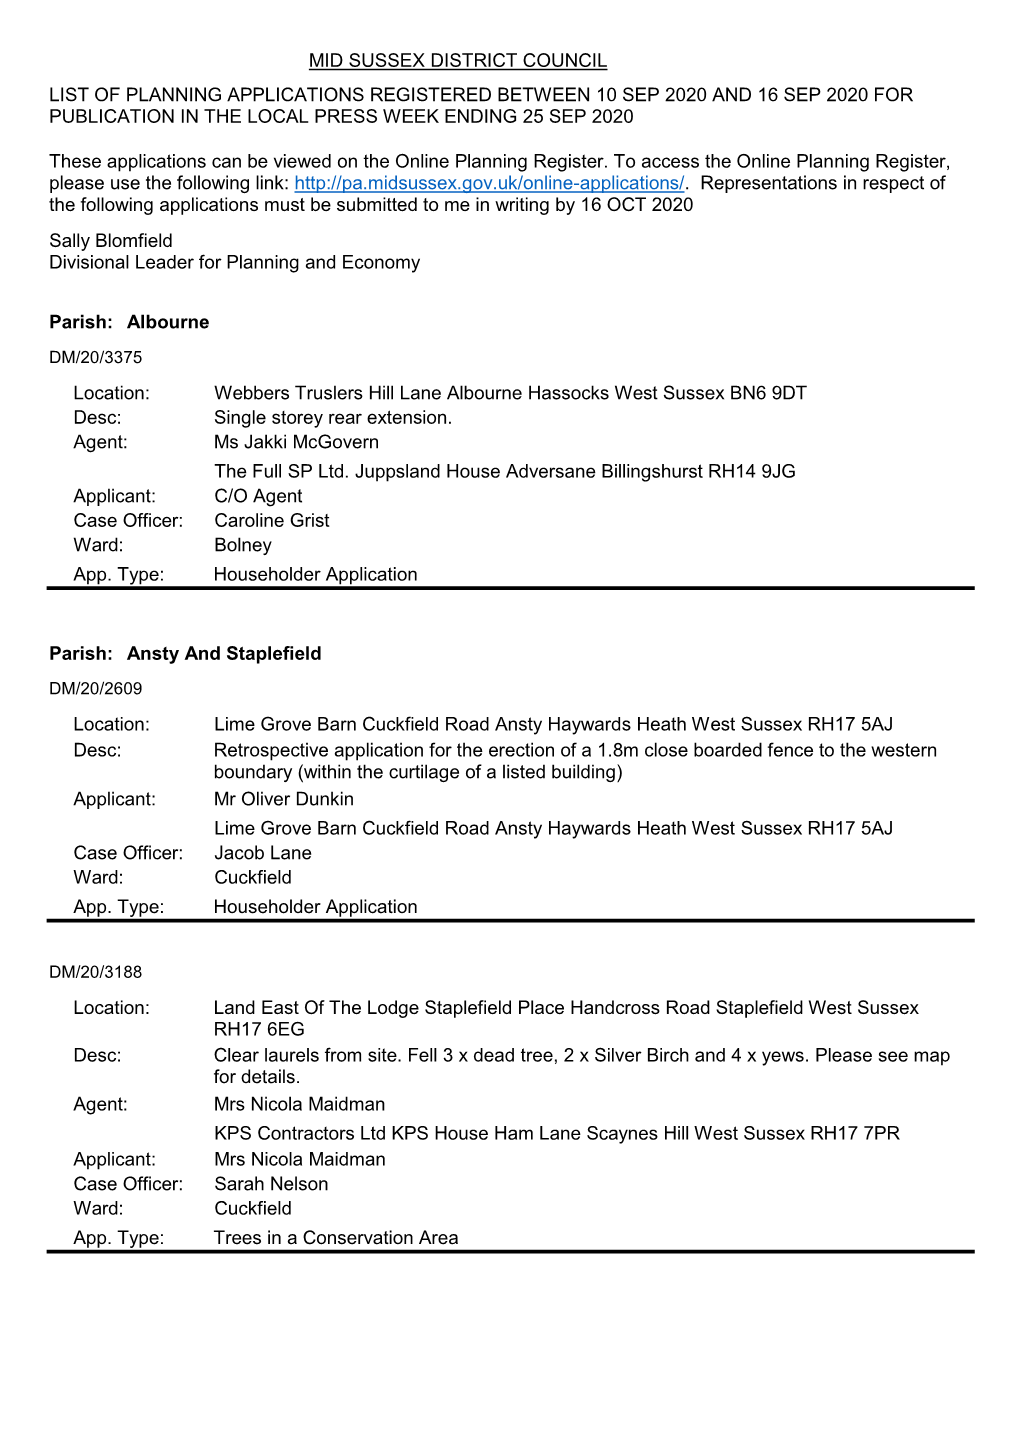 Mid Sussex District Council List of Planning Applications Registered Between 10 Sep 2020 and 16 Sep 2020 for Publication in the Local Press Week Ending 25 Sep 2020